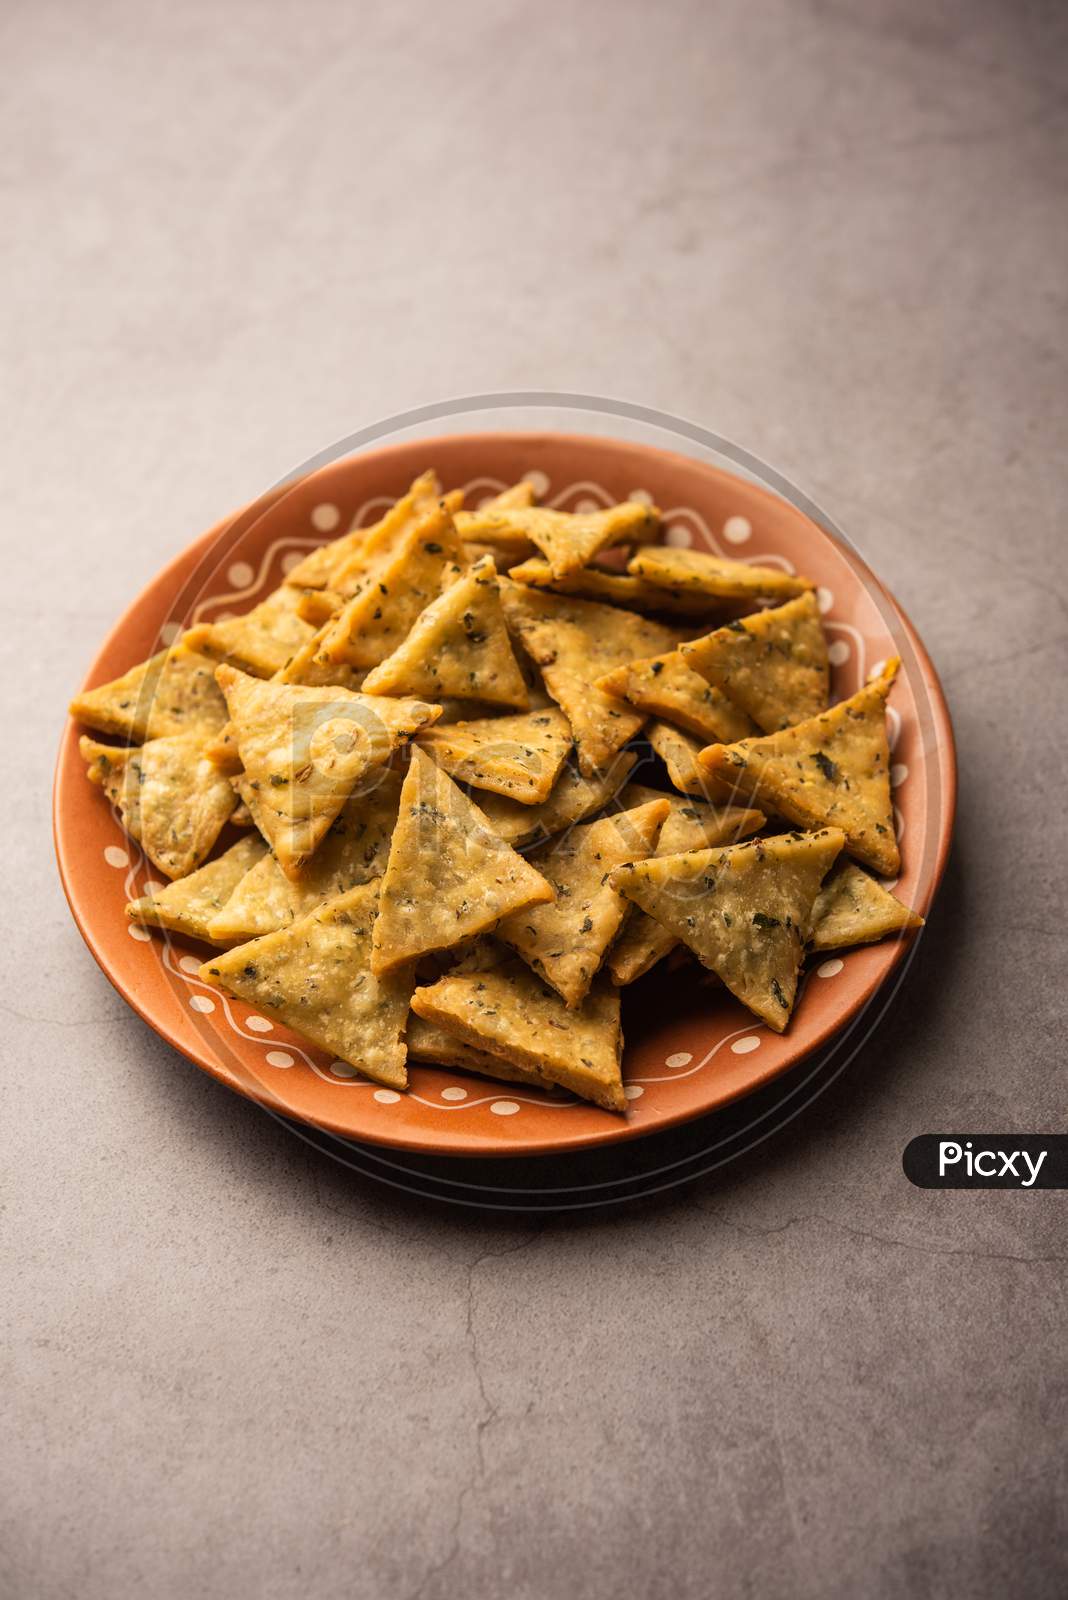 Spinach Or Methi Leaves Mathri, Indian Snack In Triangle Shape Served In A Bowl Or Plate